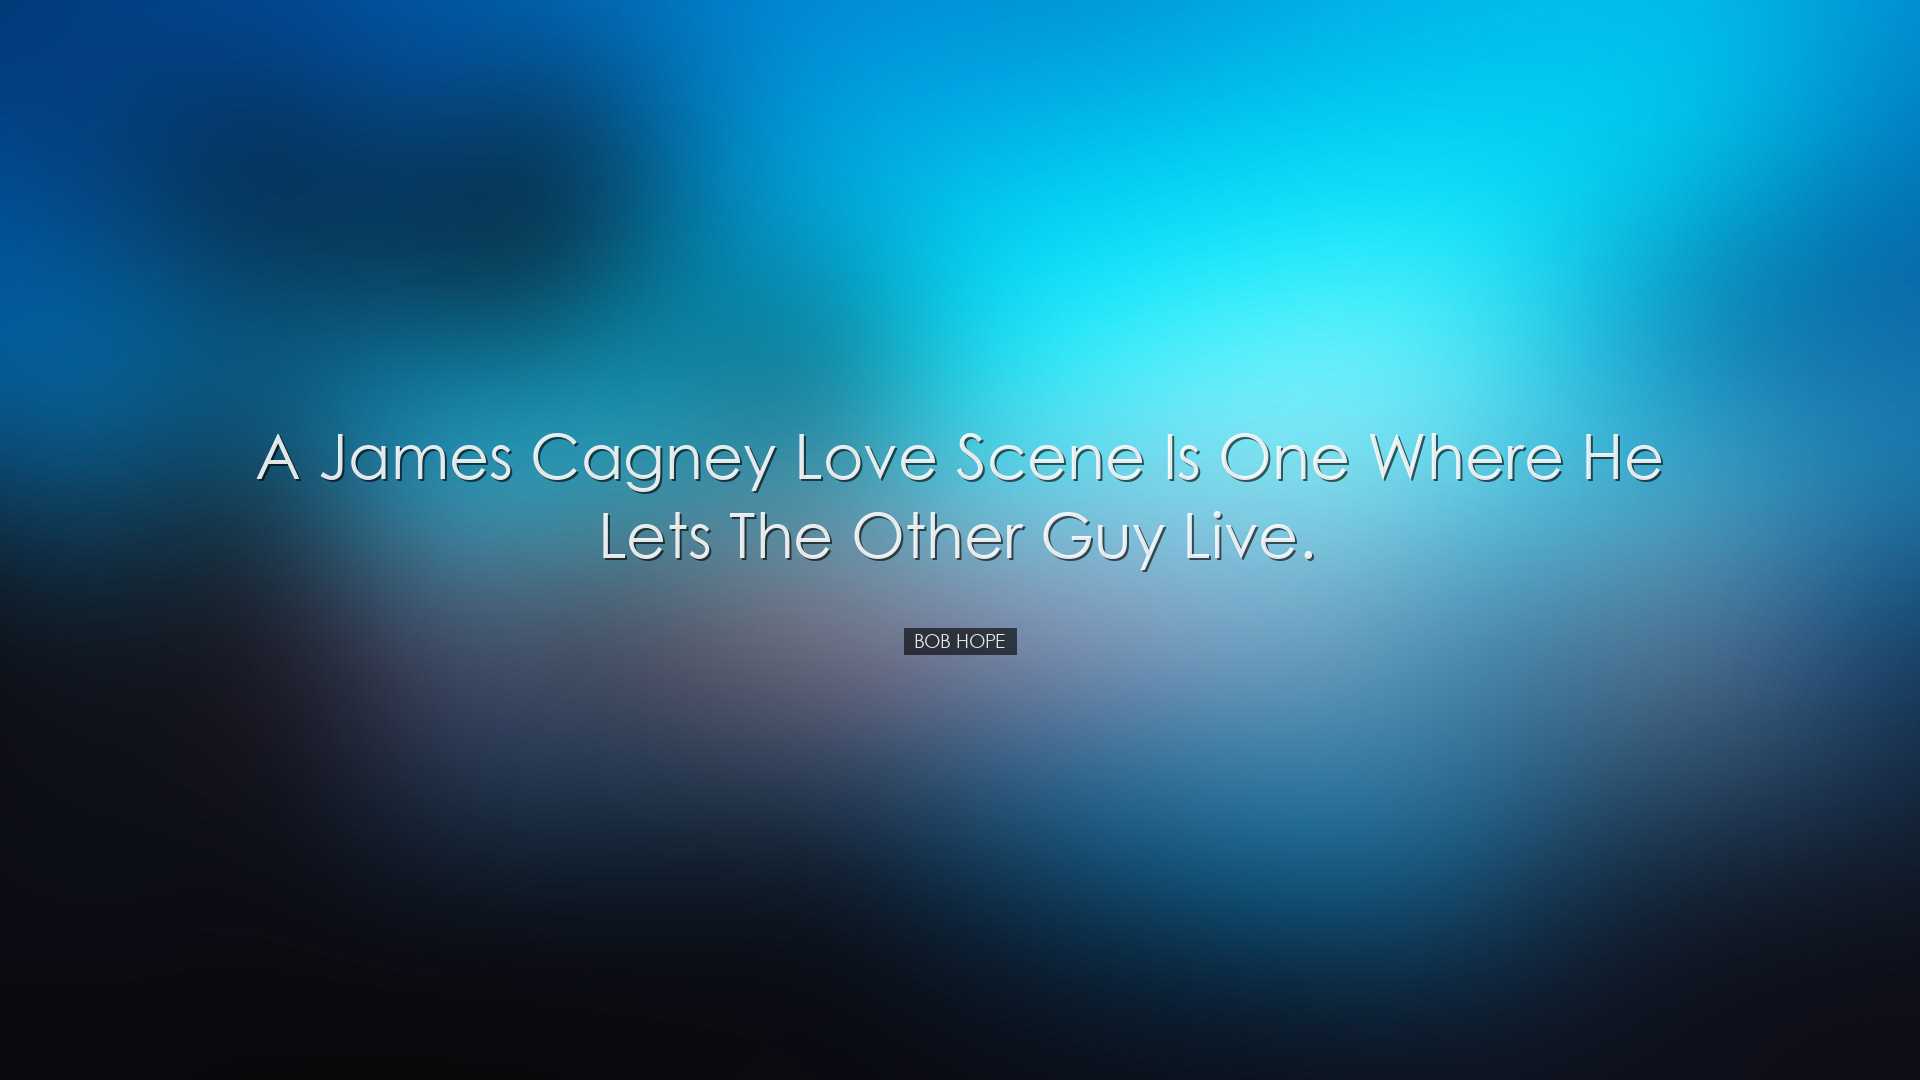 A James Cagney love scene is one where he lets the other guy live.